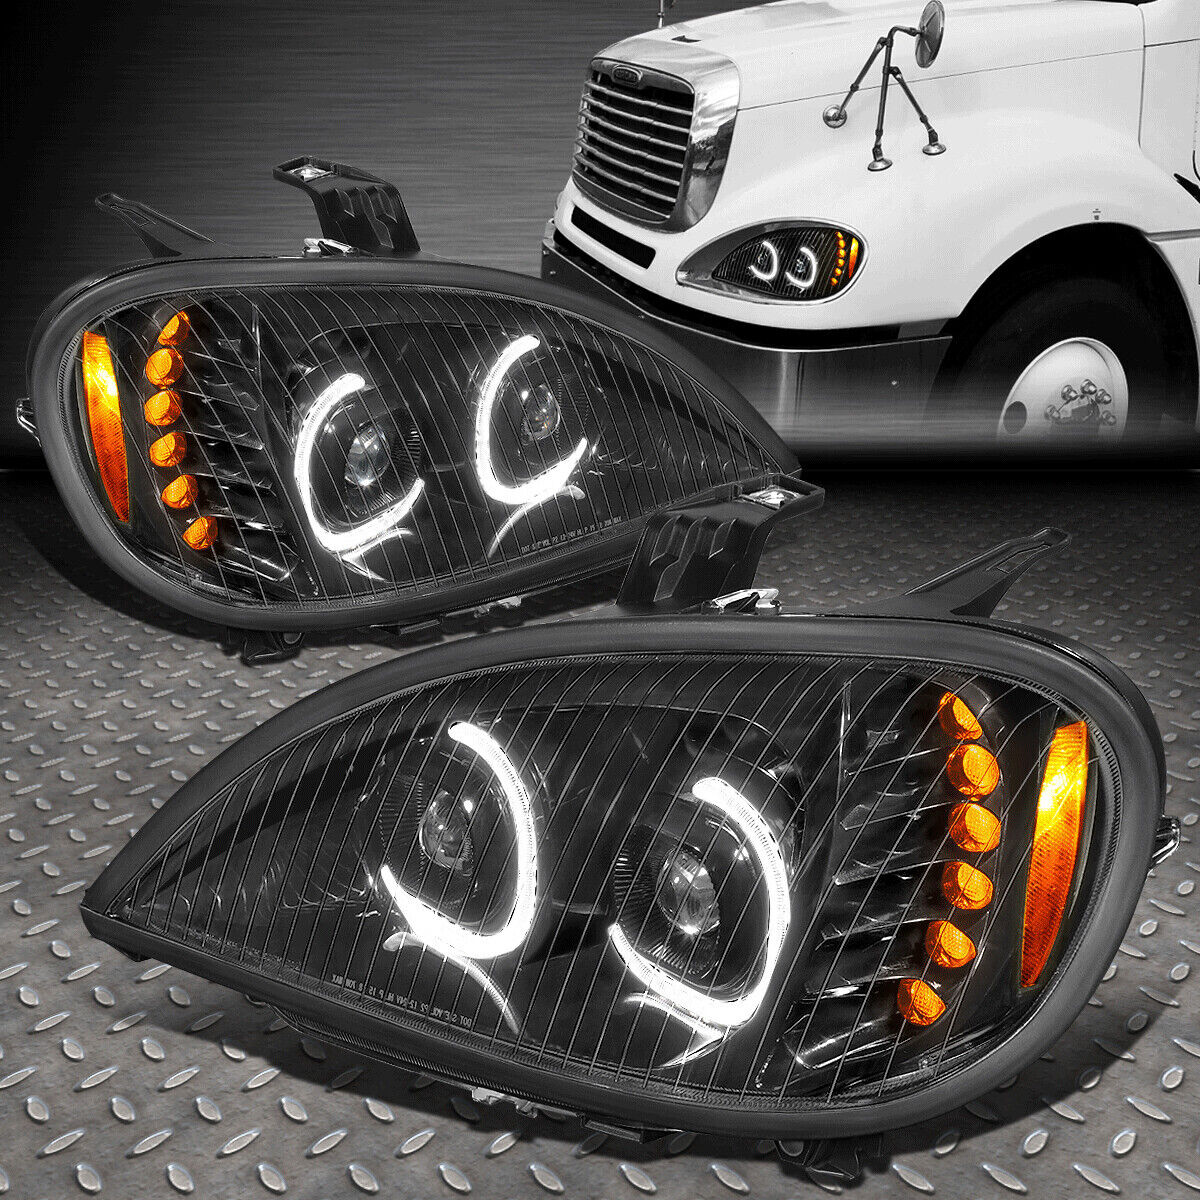 [LED DRL]FOR 04-17 FREIGHTLINER COLUMBIA DUAL PROJECTOR HEADLIGHT LAMPS BALCK